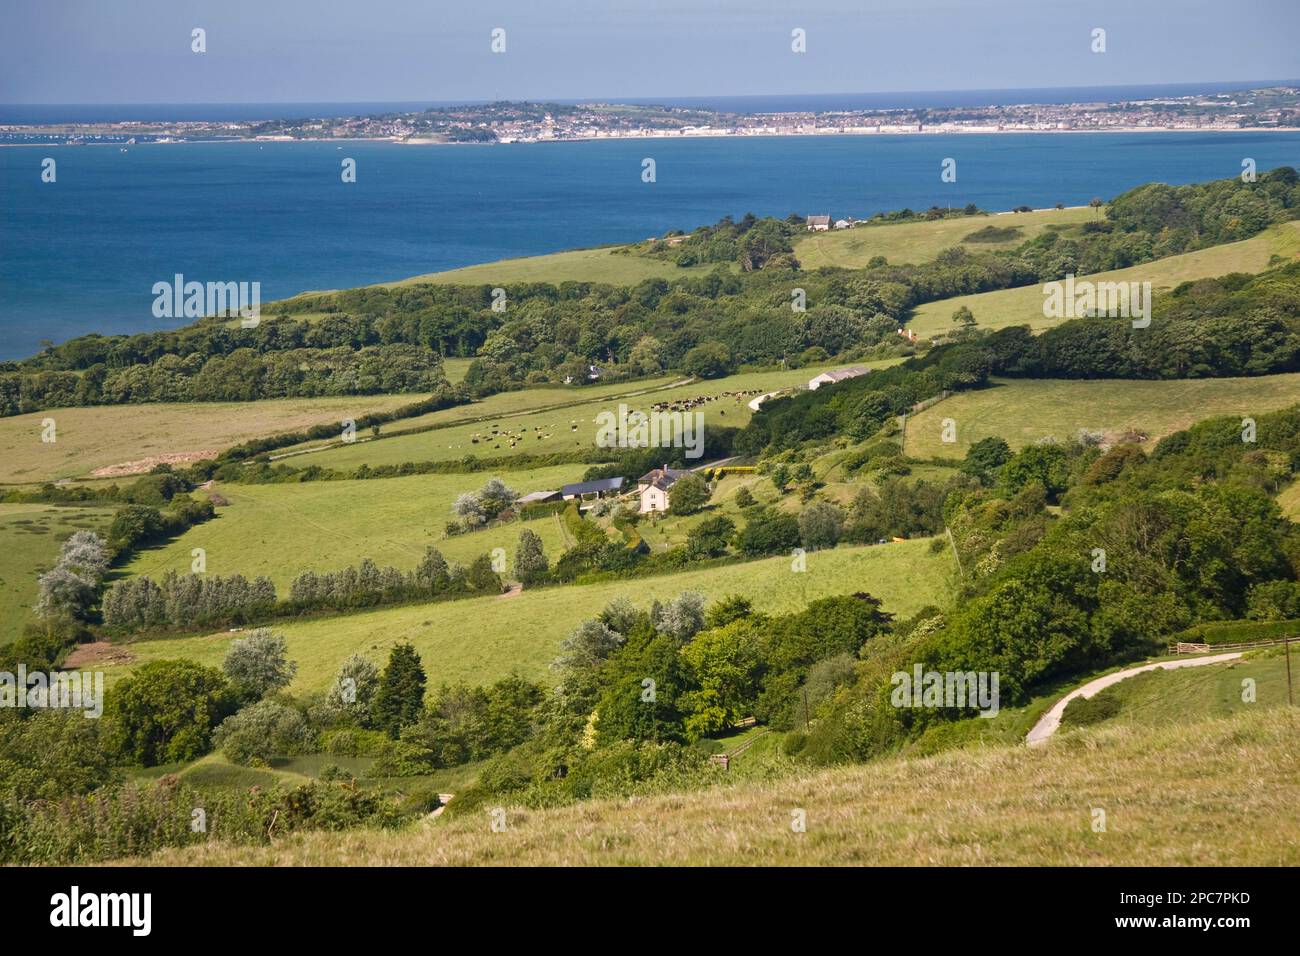 View of farmland on the coast, with farm buildings, pasture and trees, Weymouth in the distance, Dorset, England, springtime Stock Photo